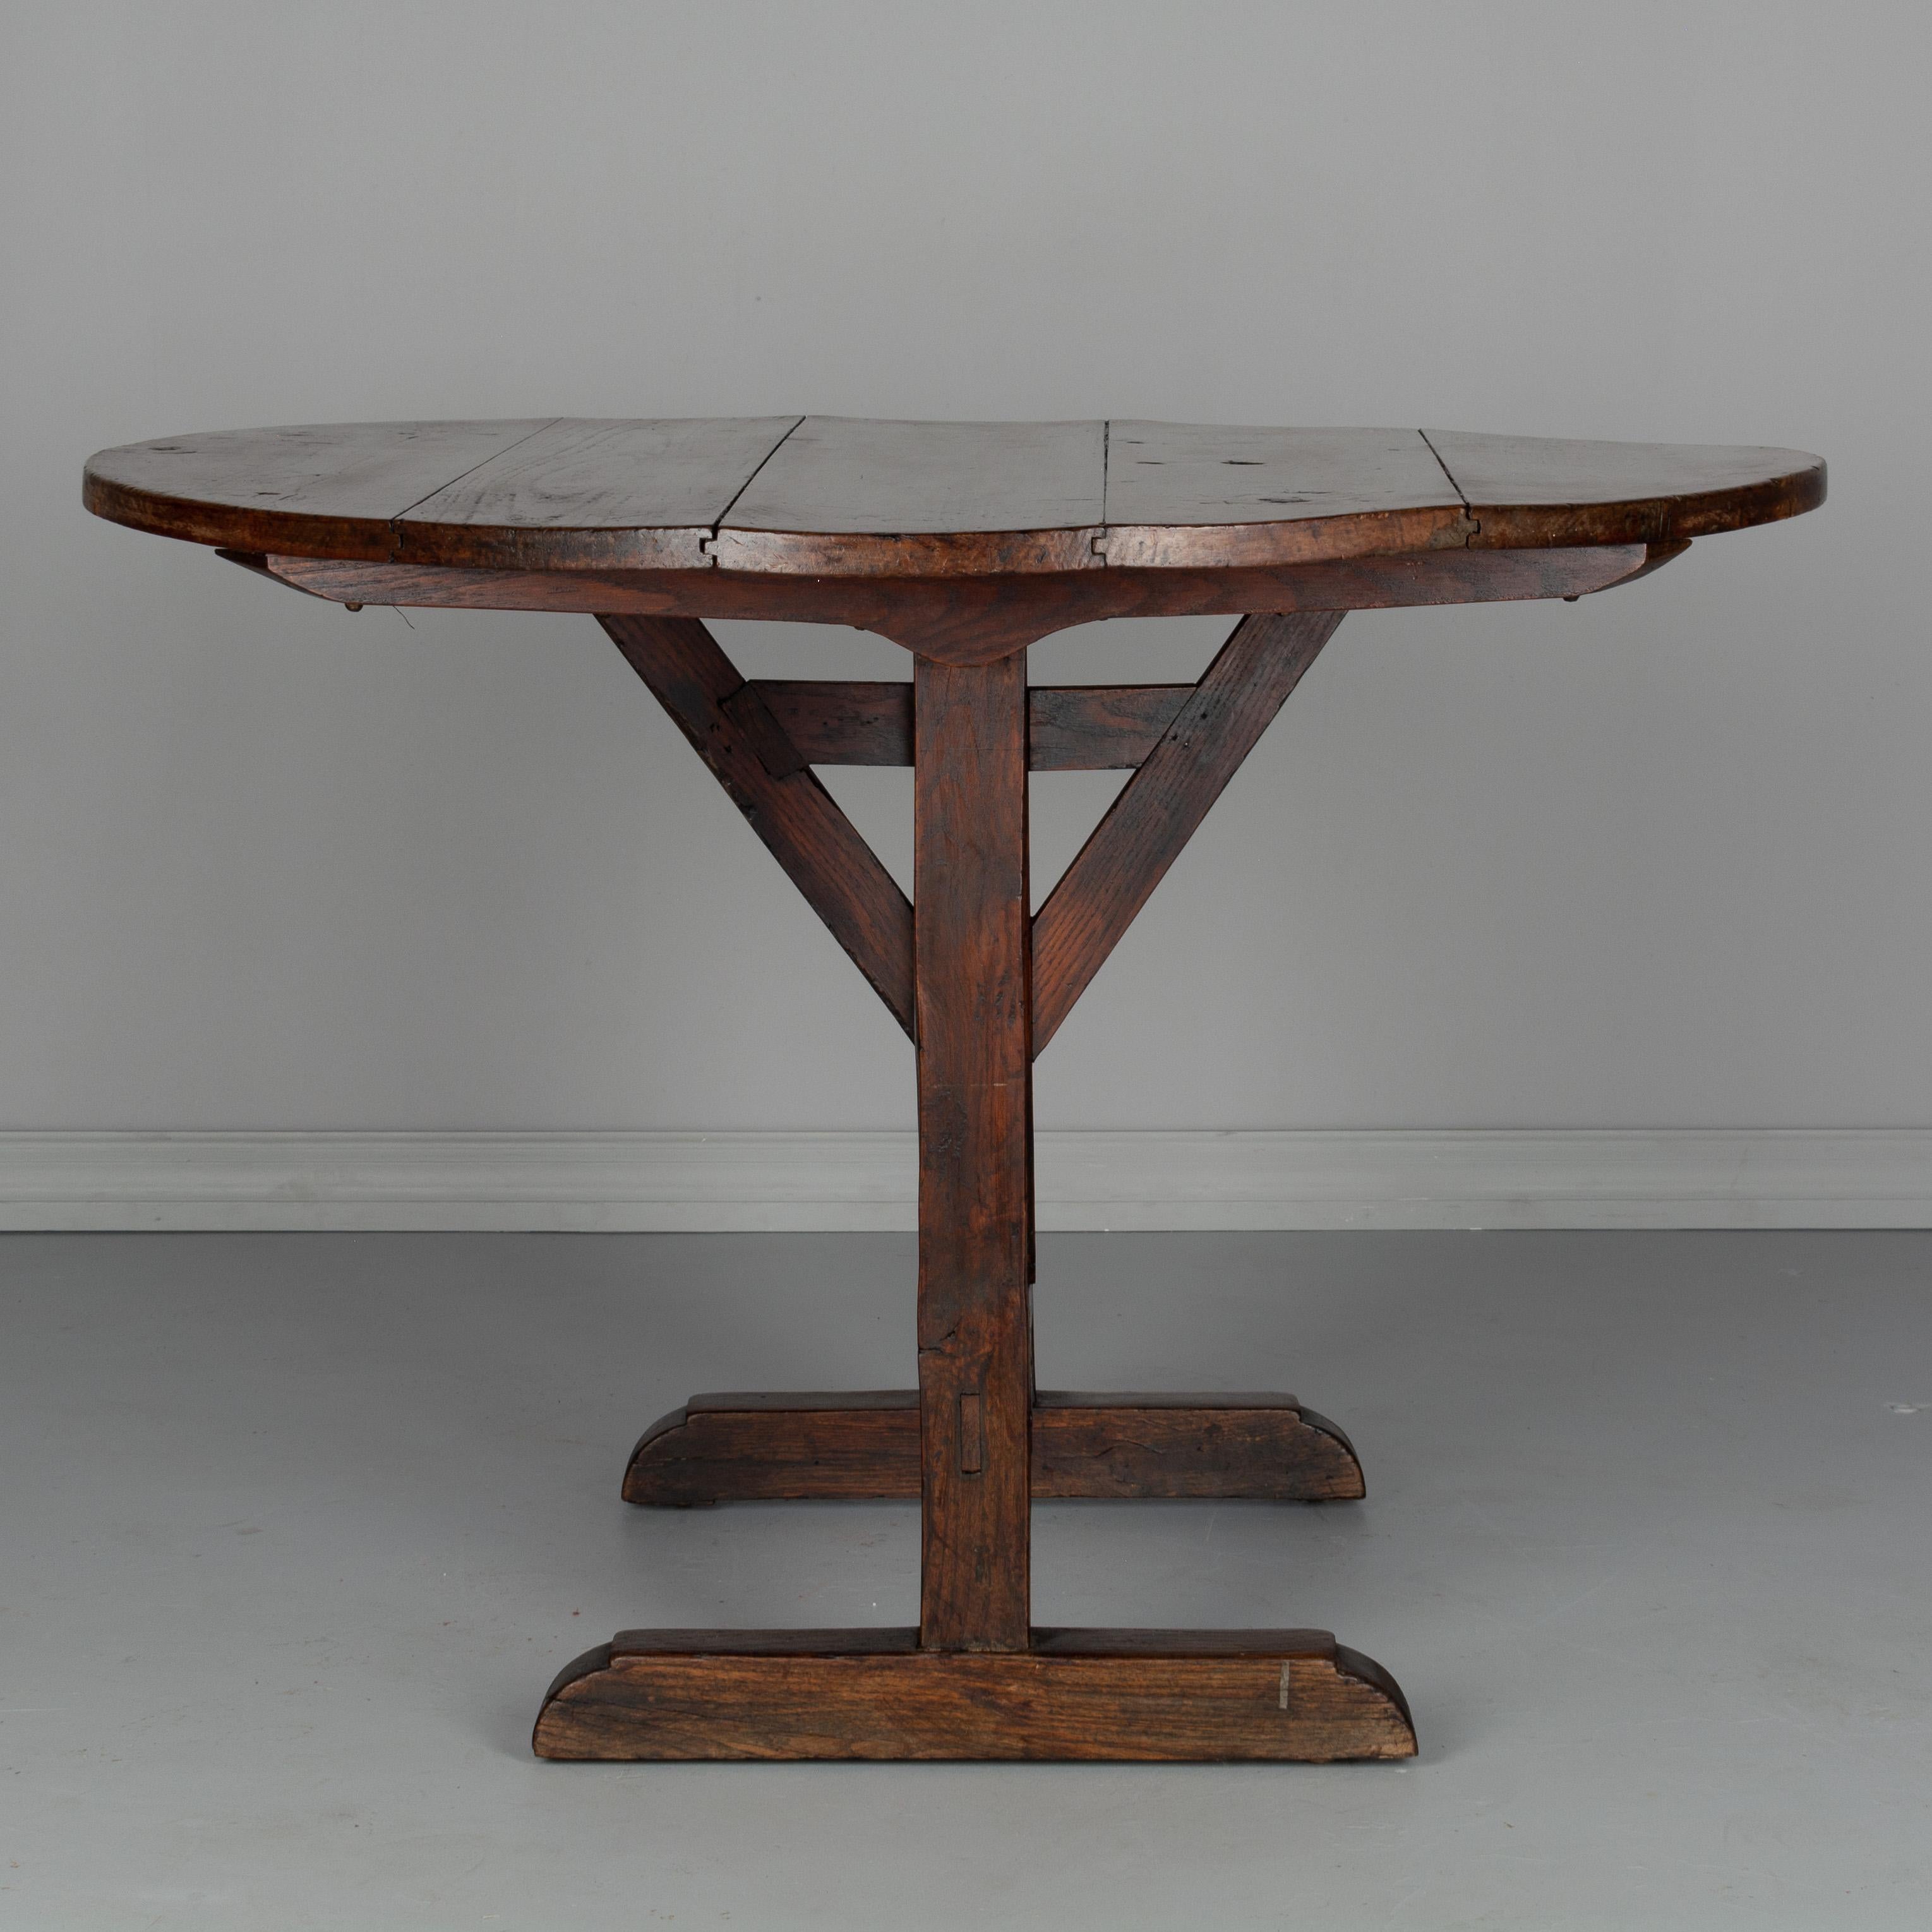 A late 19th century French wine tasting or tilt-top table with a base made of oak and the top made from five planks of poplar. Good and sturdy with mortise and tenon joints and pegged construction. Nice rustic character to the wood with several